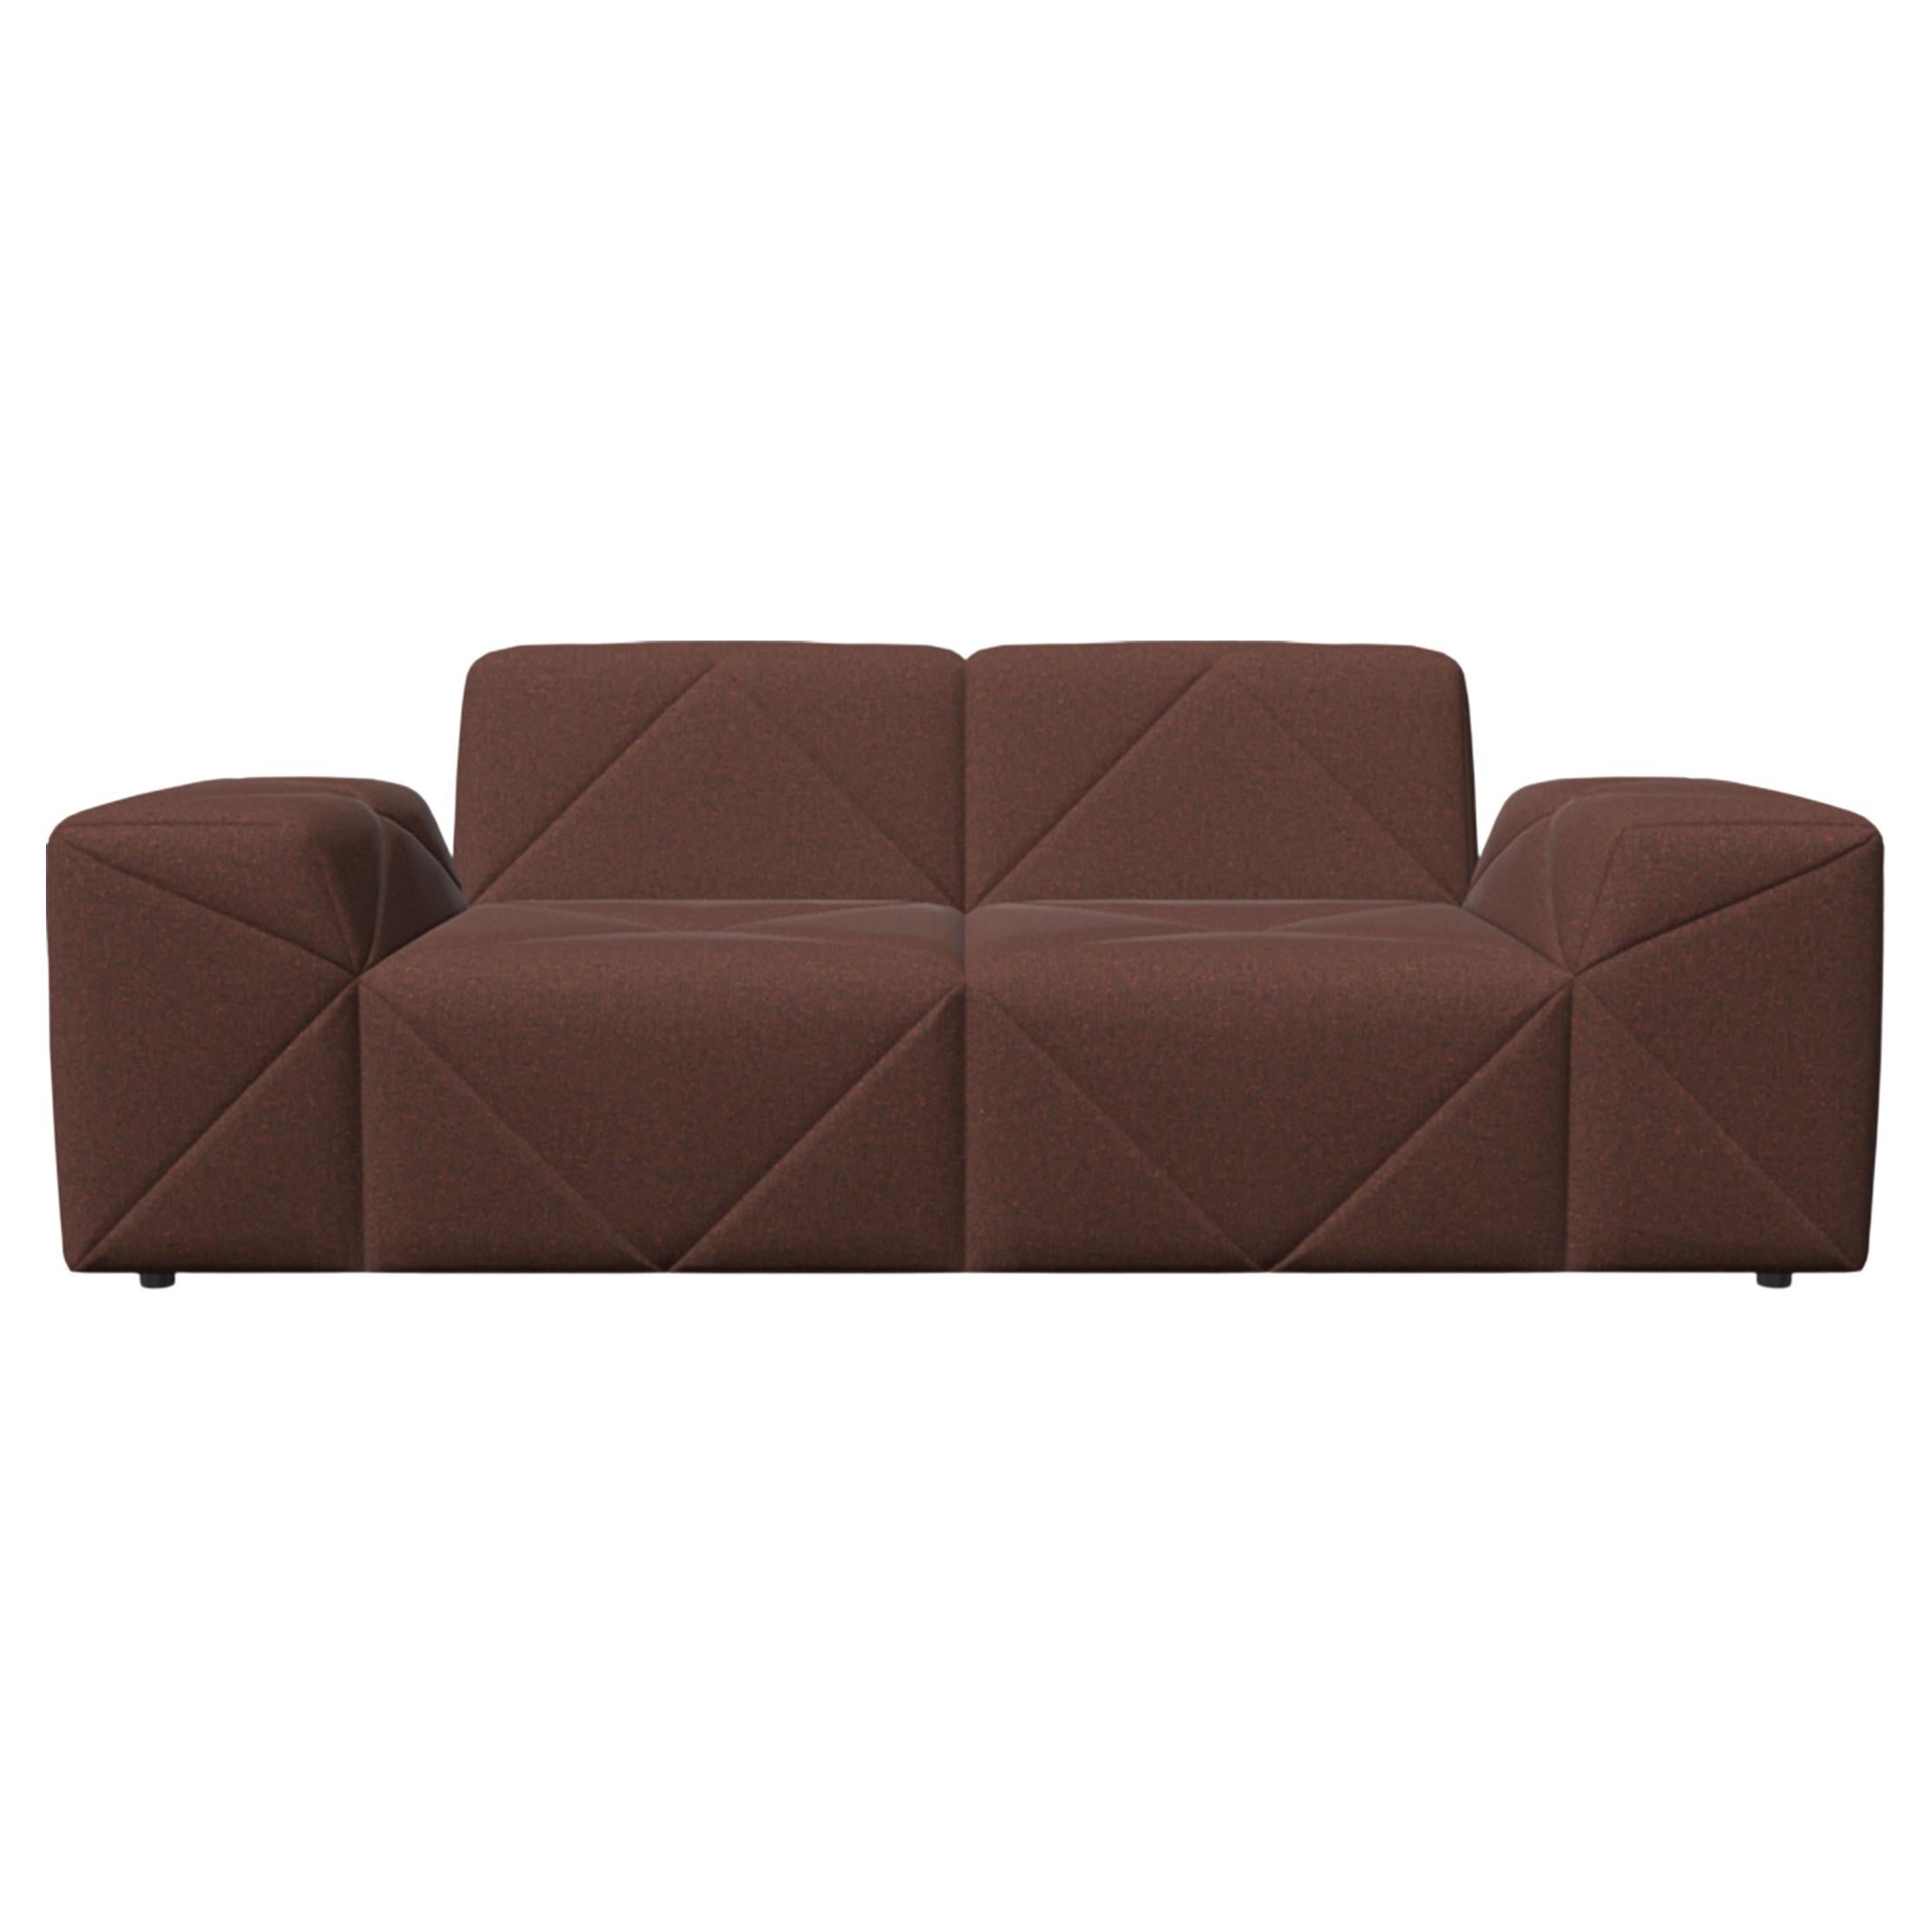 Moooi BFF Double Seater DE01 Low Sofa in Solis, Sunset Red Upholstery For Sale